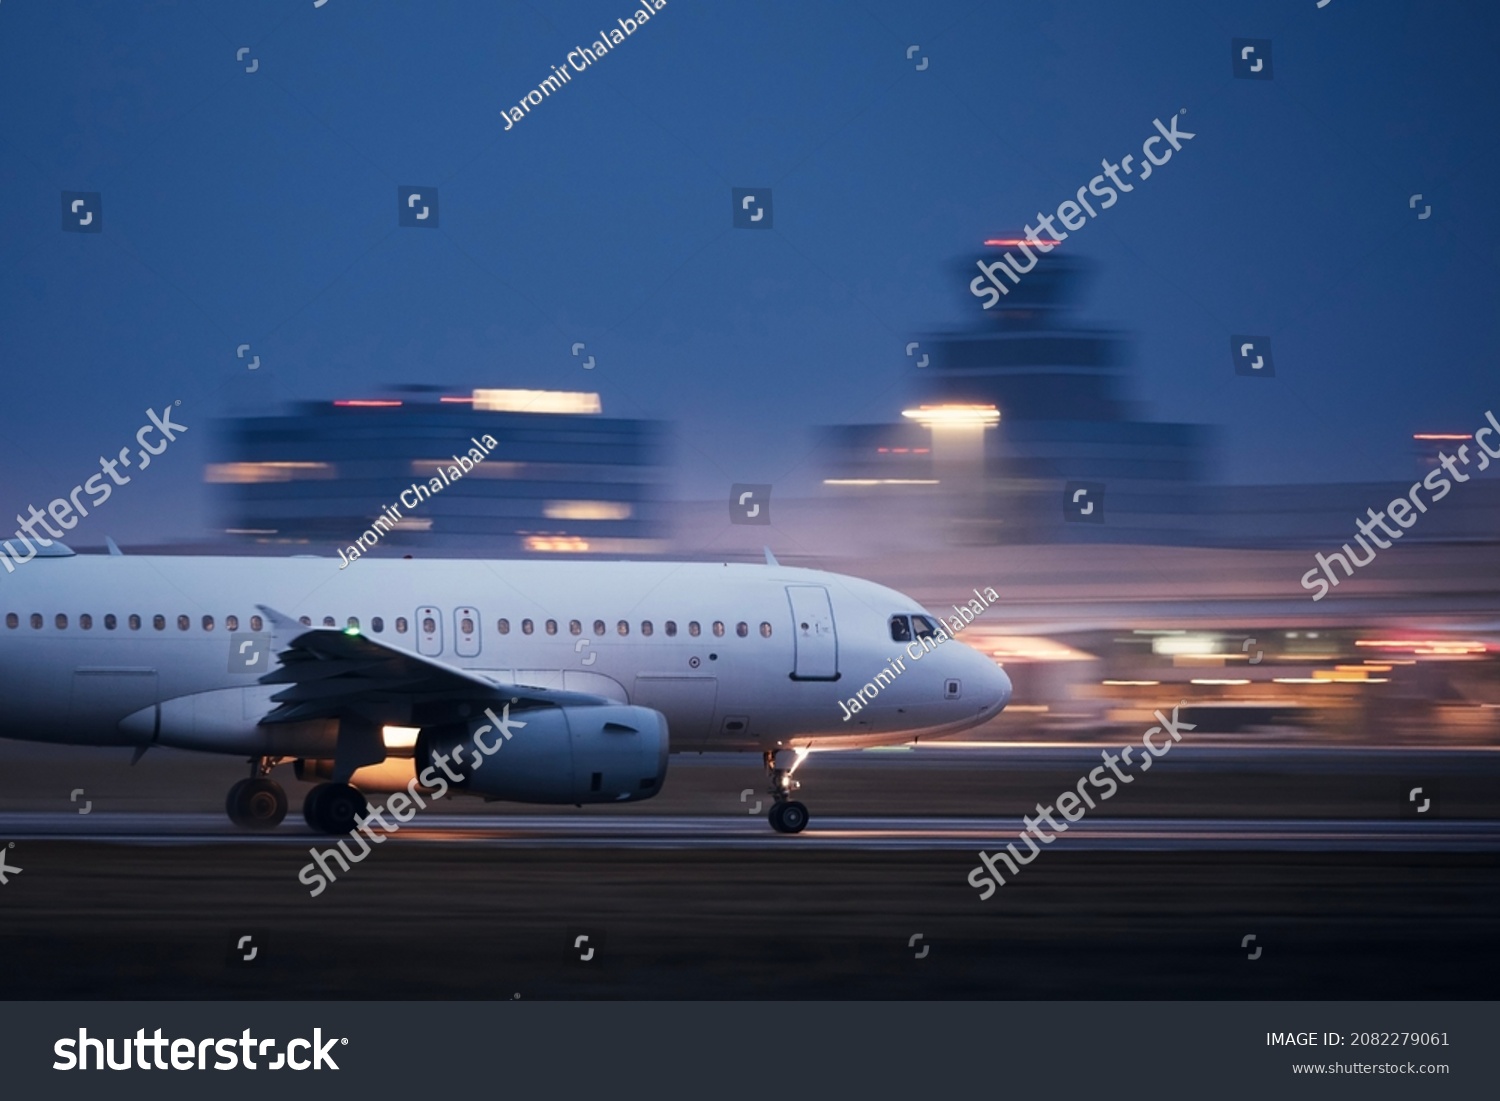 Airplane during take off on airport runway at night against air traffic control tower. Plane in blurred motion at night. #2082279061